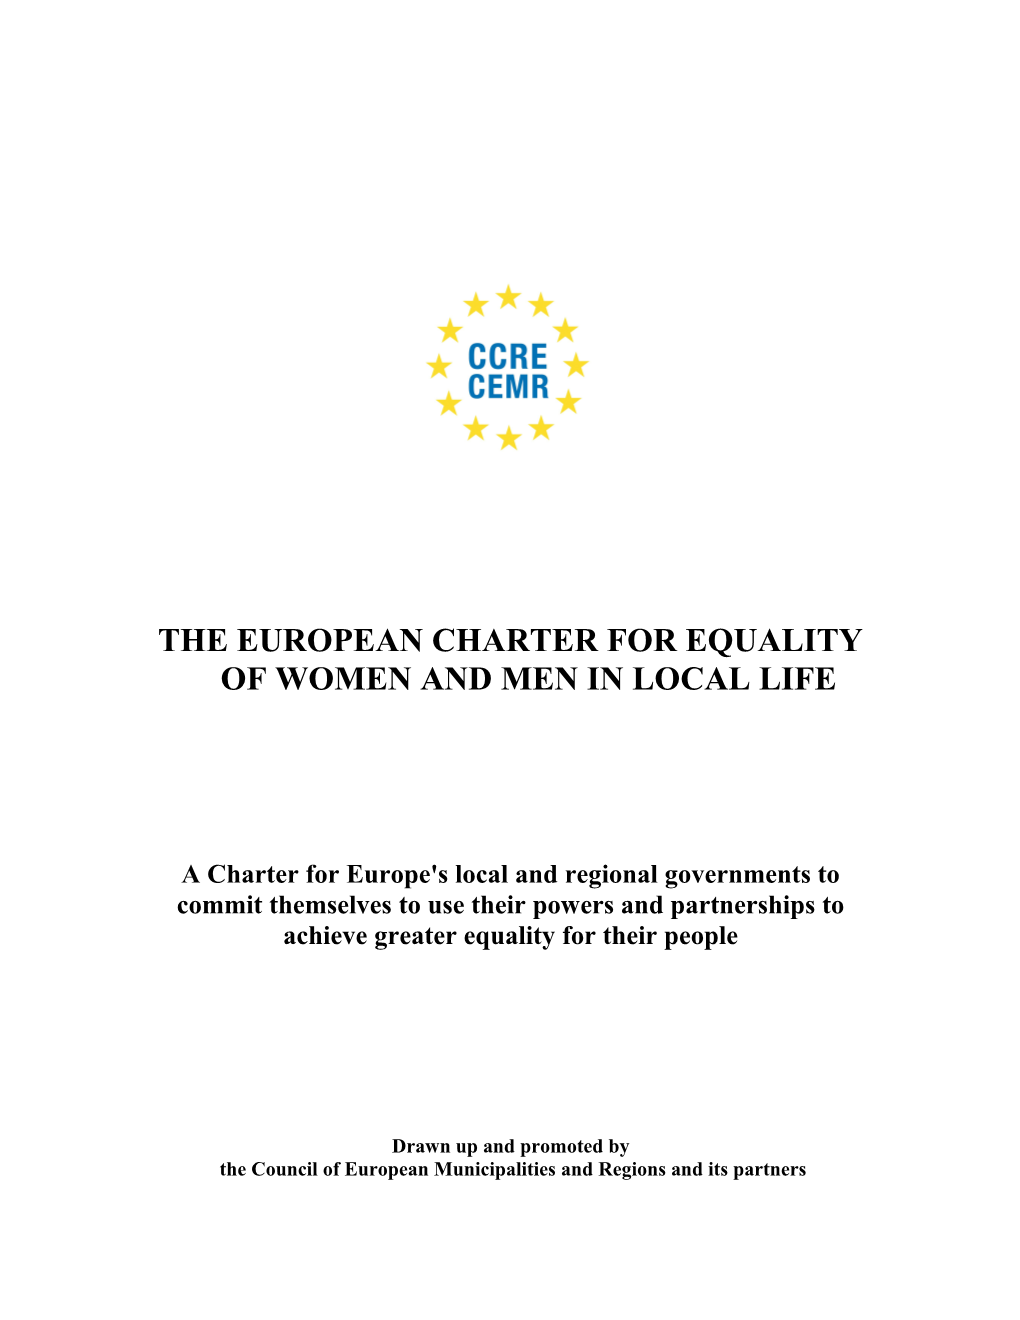 Implementation of the Charter and Its Commitments